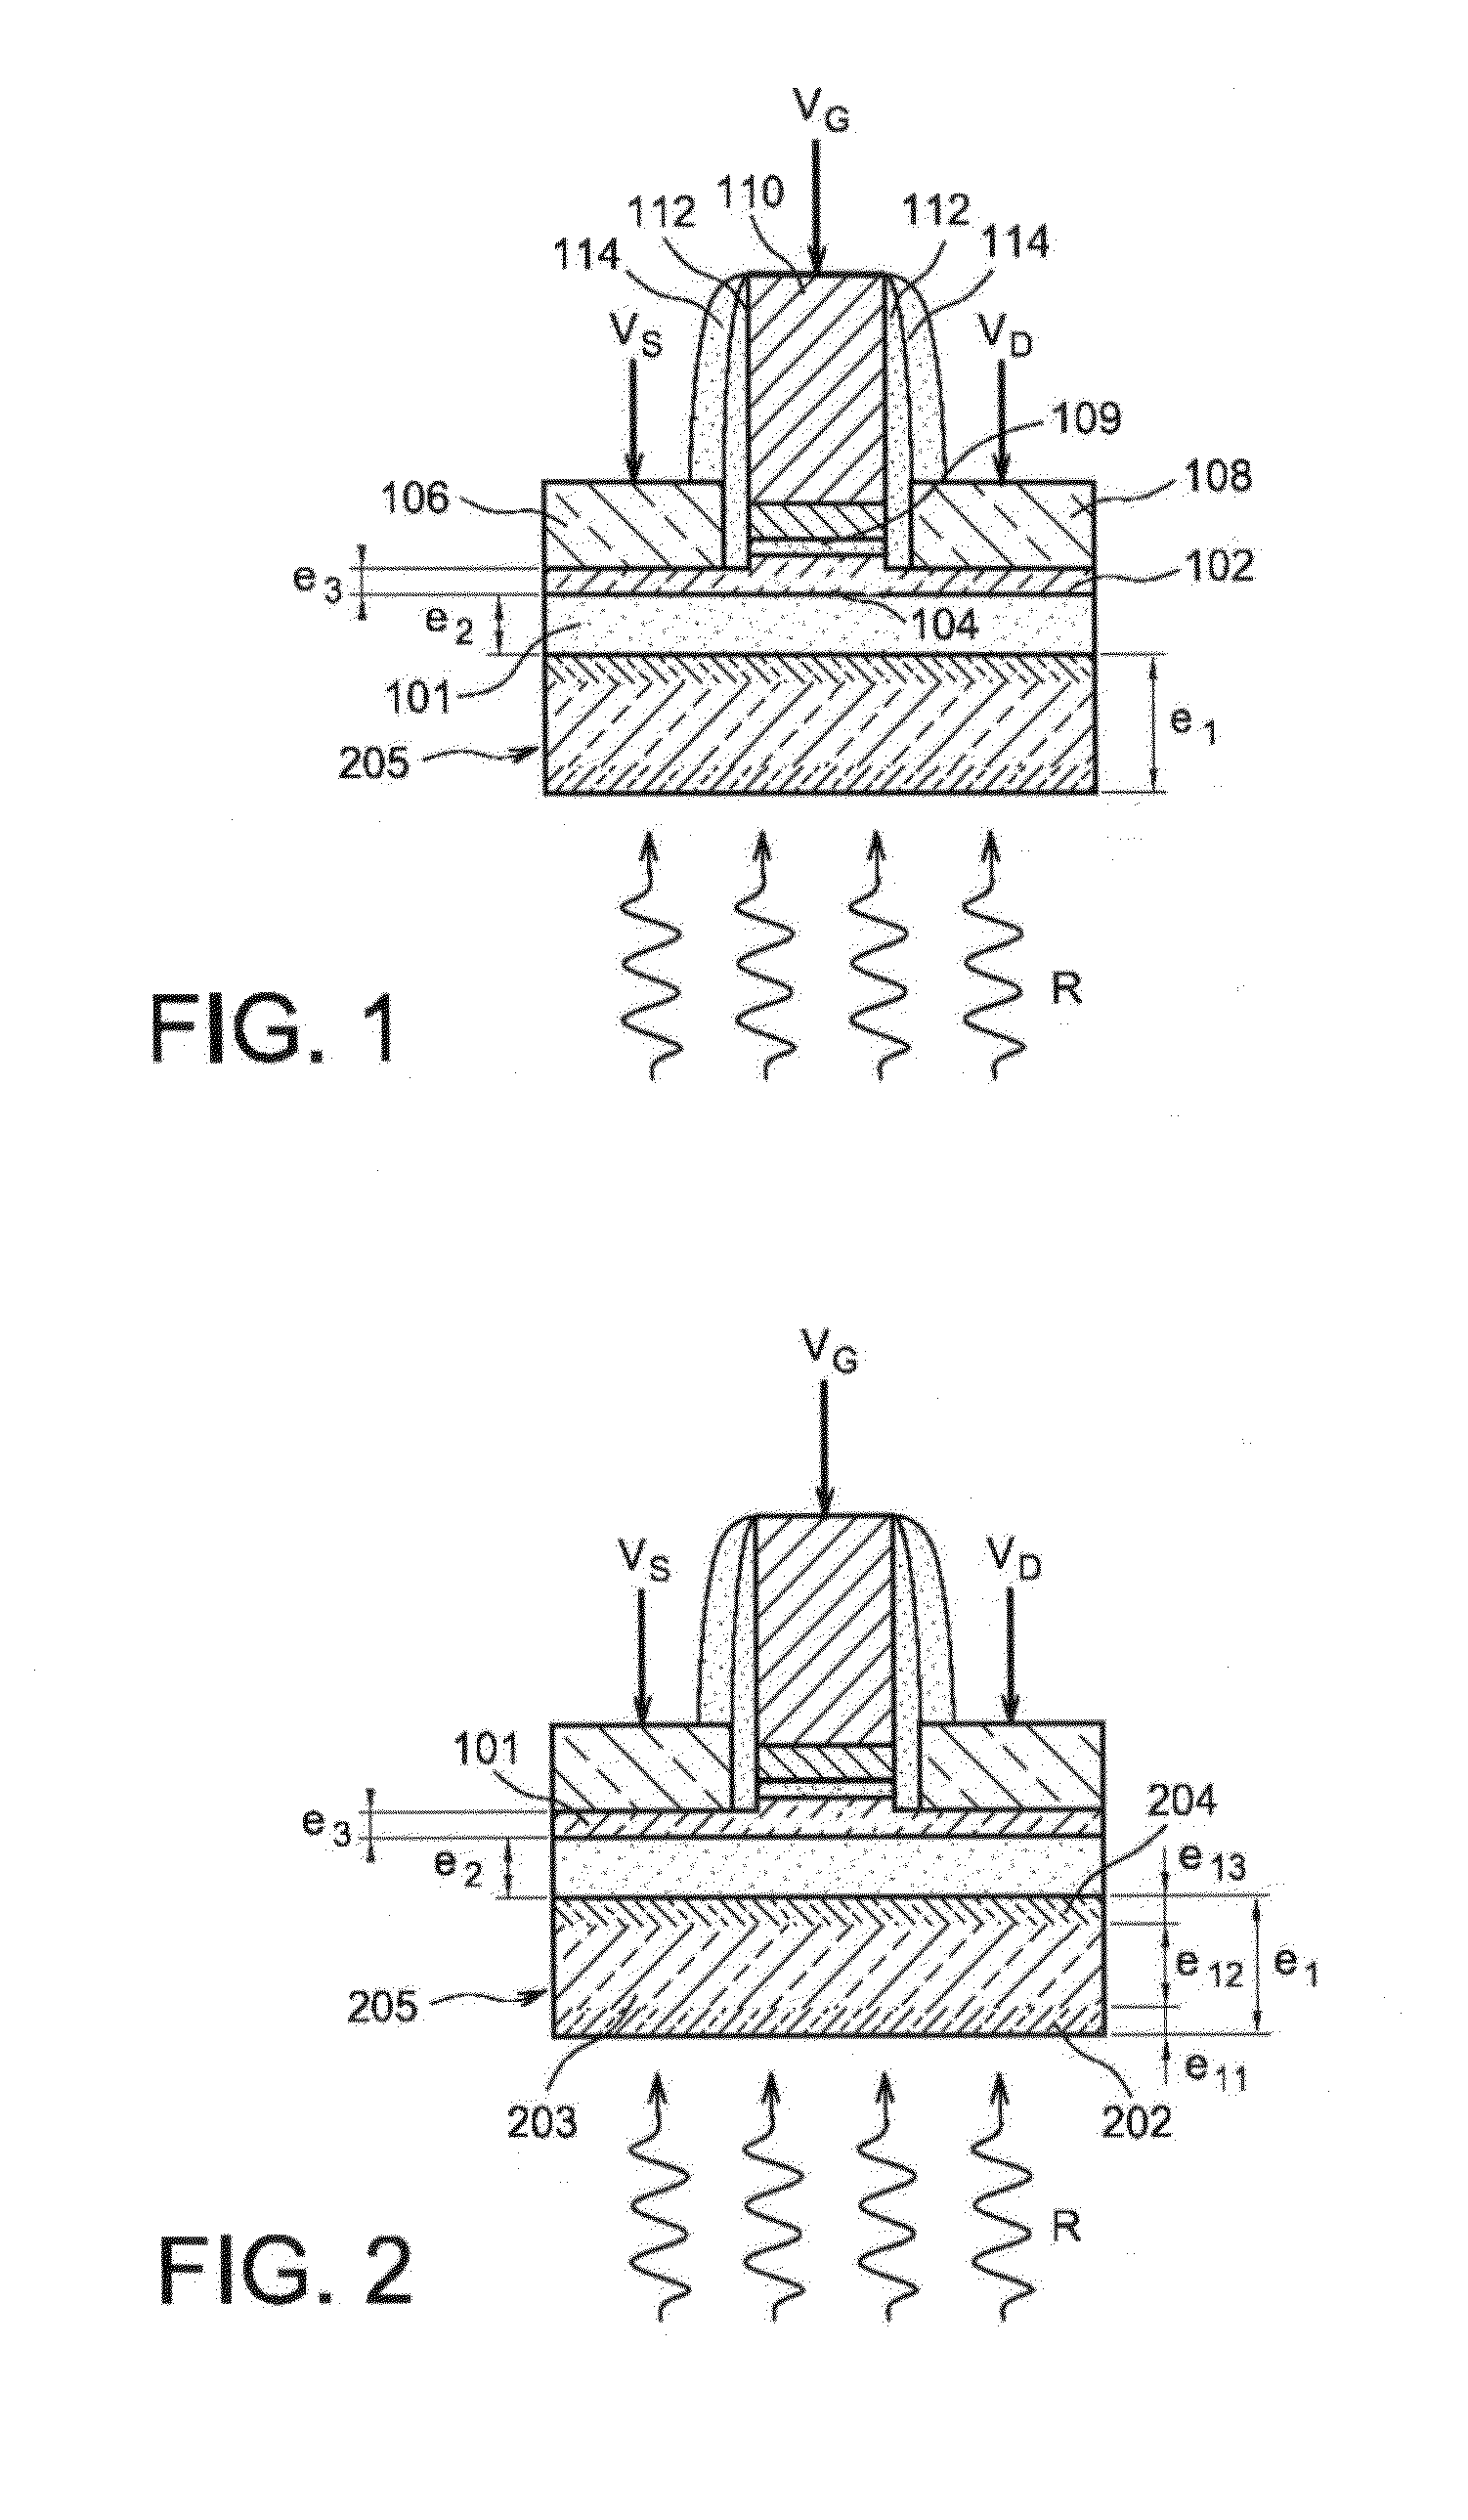 UTBB CMOS imager having a diode junction in a photosensitive area thereof